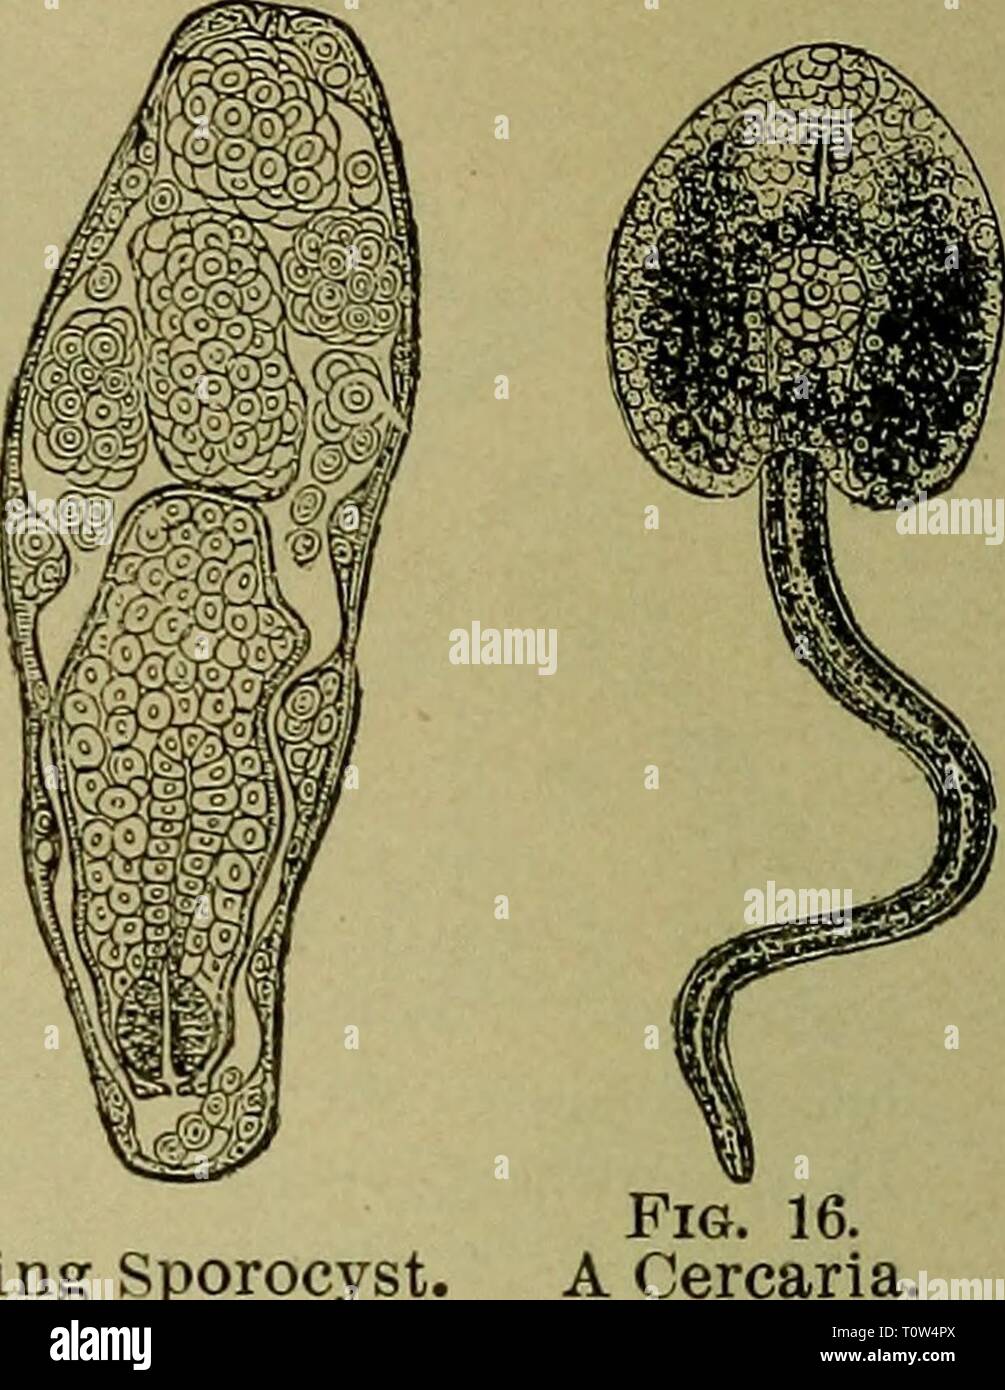 The domestic sheep  its The domestic sheep : its culture and general management  domesticsheepits01stew Year: 1900  FiG. 15. A Mature and Dividing Sporocyst. bellied.' At first the sheep appear to thrive better than usual and rapidly make fat, which, however, is yellowish in color. Very soon the characteristic dropsy appears, a bag of fluid forms under the jaws, severe diarrhea occurs, and the animal soon becomes emaciated and perishes miserably by a slow wasting until completely exhausted. As the fluke does not inhabit salt water, salt marshes are safe pasture grounds; but it does not follow  Stock Photo